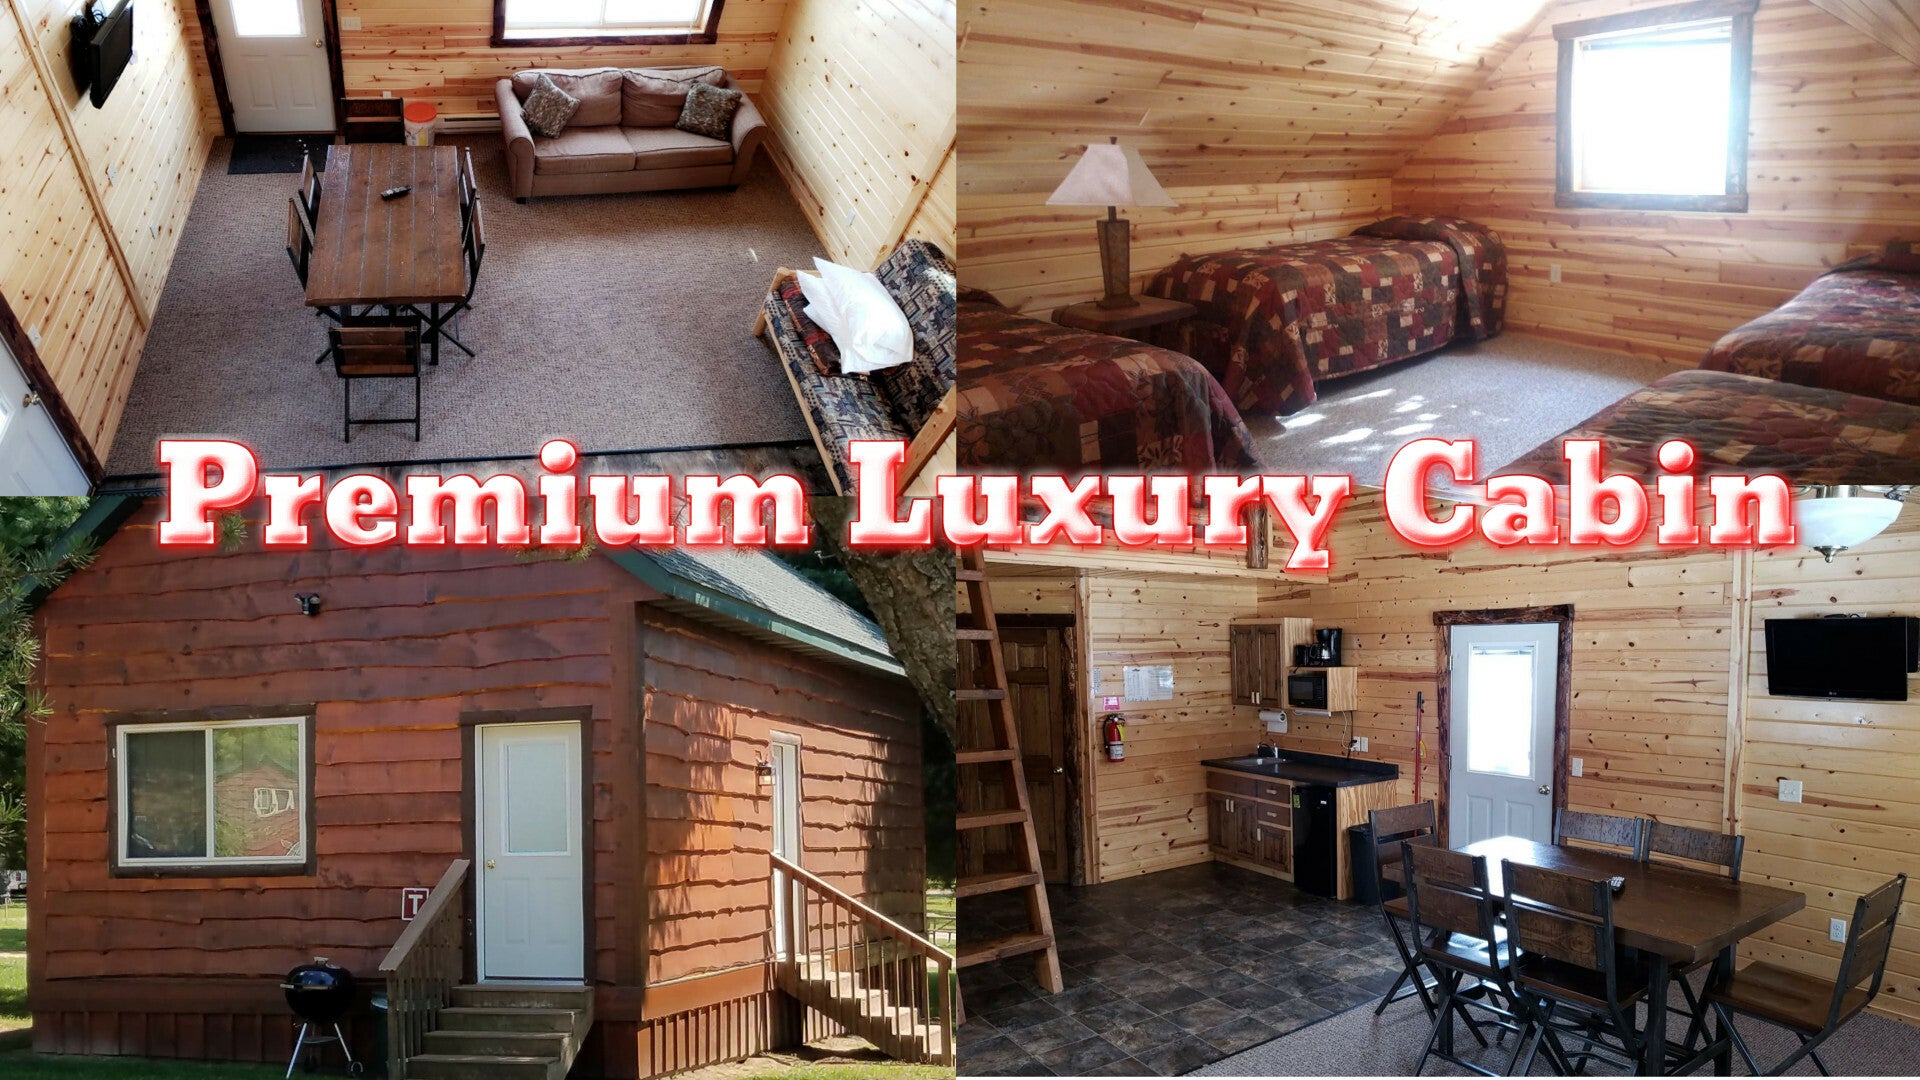 Premium Luxury Cabin- Sleeps 12 people, 2 bedrooms-1 Queen bed in each, ladder loft with 2 queens OR 4 twin beds, 1 log futon & sofa sleeper, flat screen TV, full bathroom (bring towels), kitchenette with microwave, coffee maker, toaster, mini refrigerator, charcoal grill, picnic table and fire-ring.